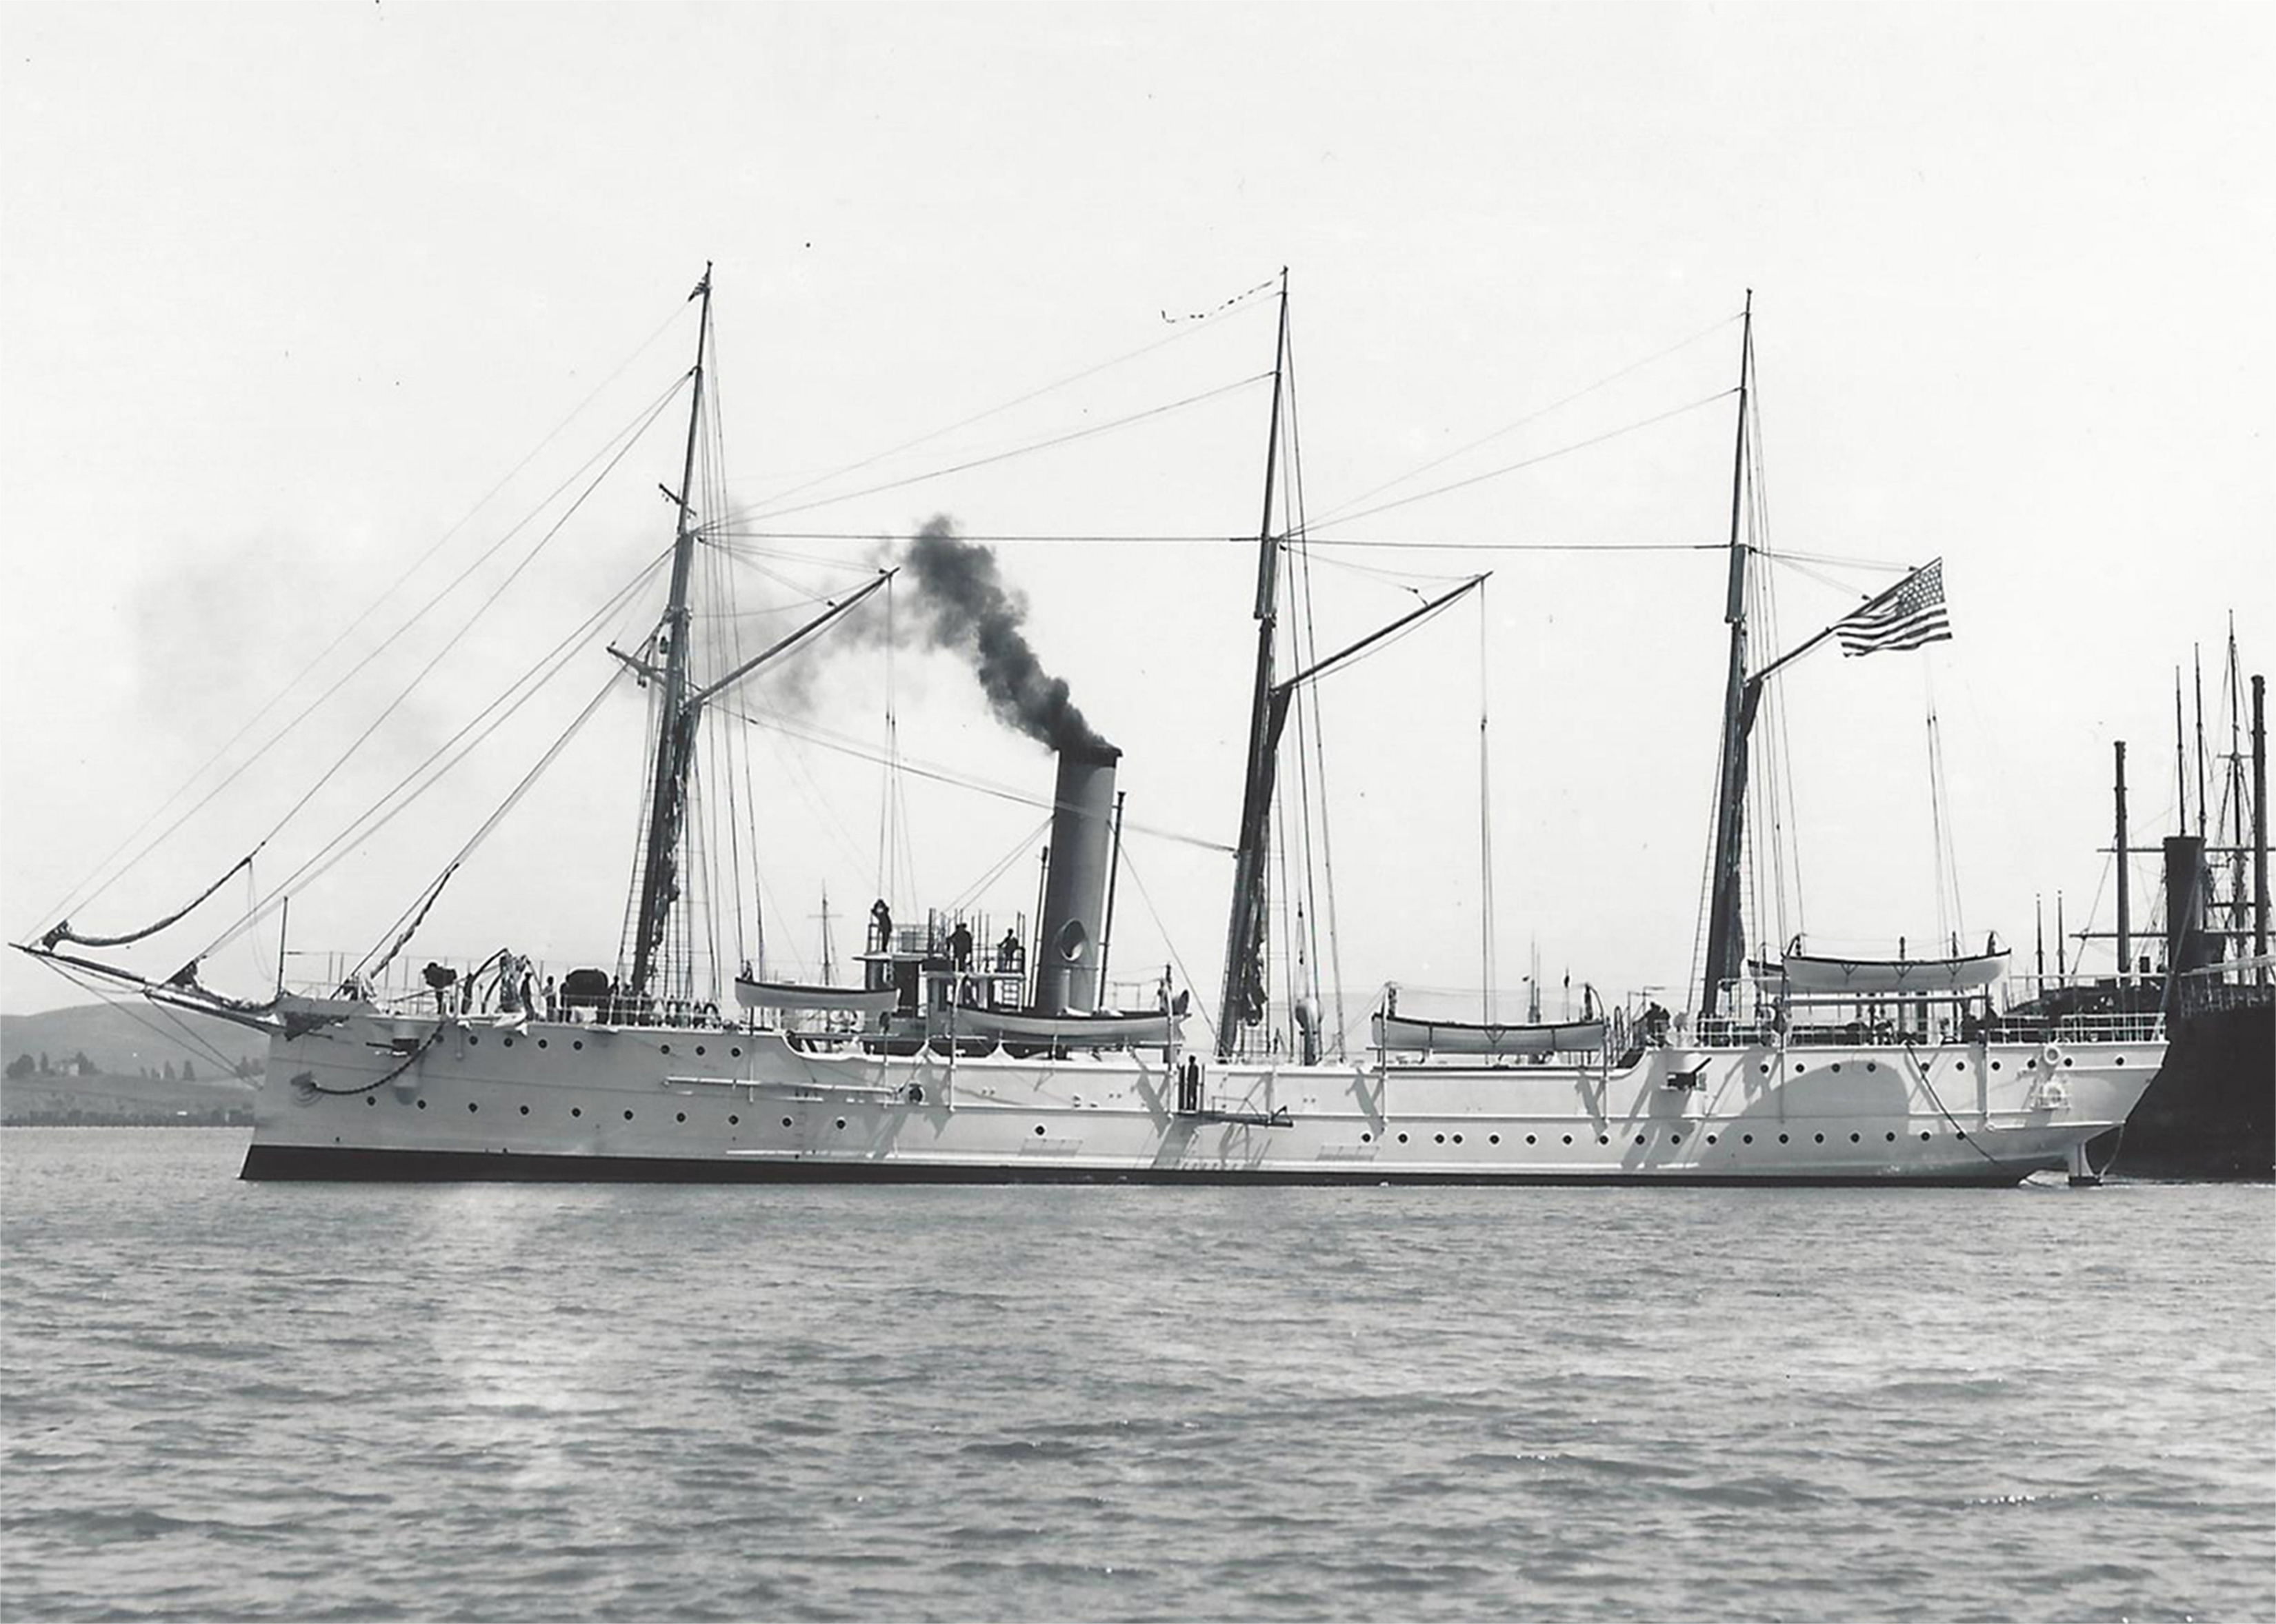 Archive image of USCG Cutter McCulloch